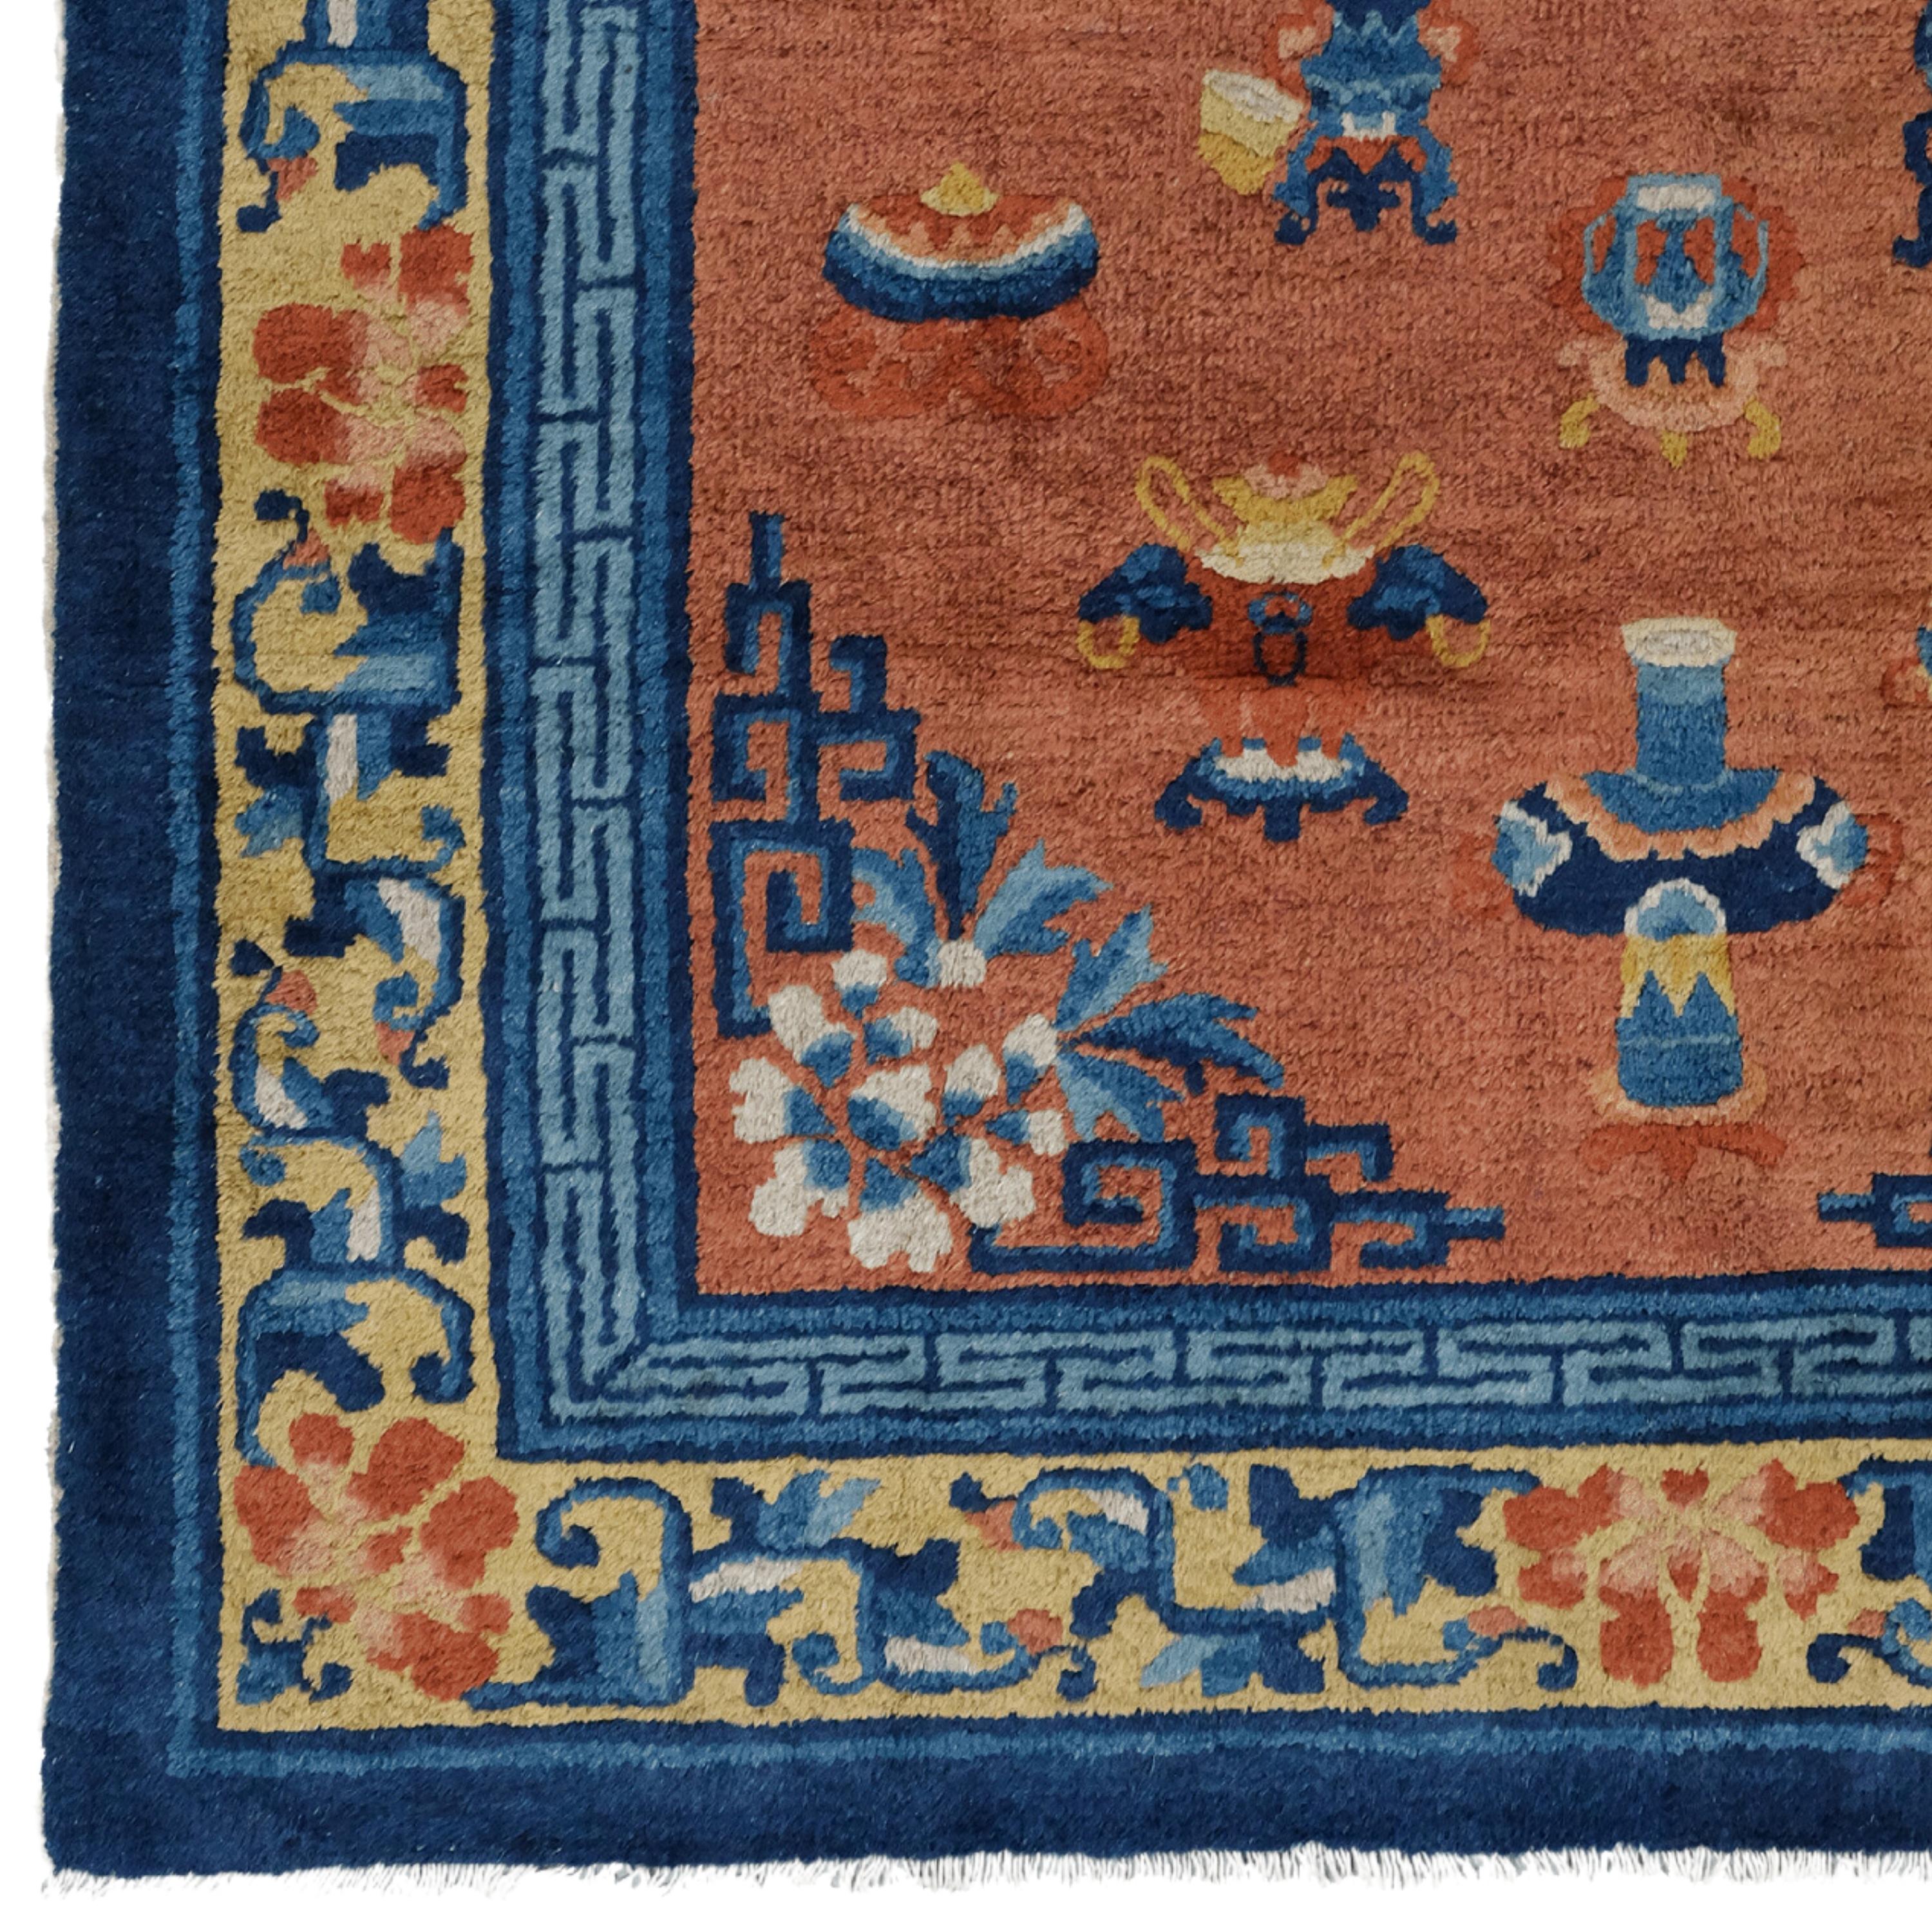 We offer a gorgeous 19th century antique china rug that will make you feel like you've stepped back in time. Each stitch tells a story of meticulous craftsmanship and long history. With its intricate patterns and vibrant colors, this masterpiece is